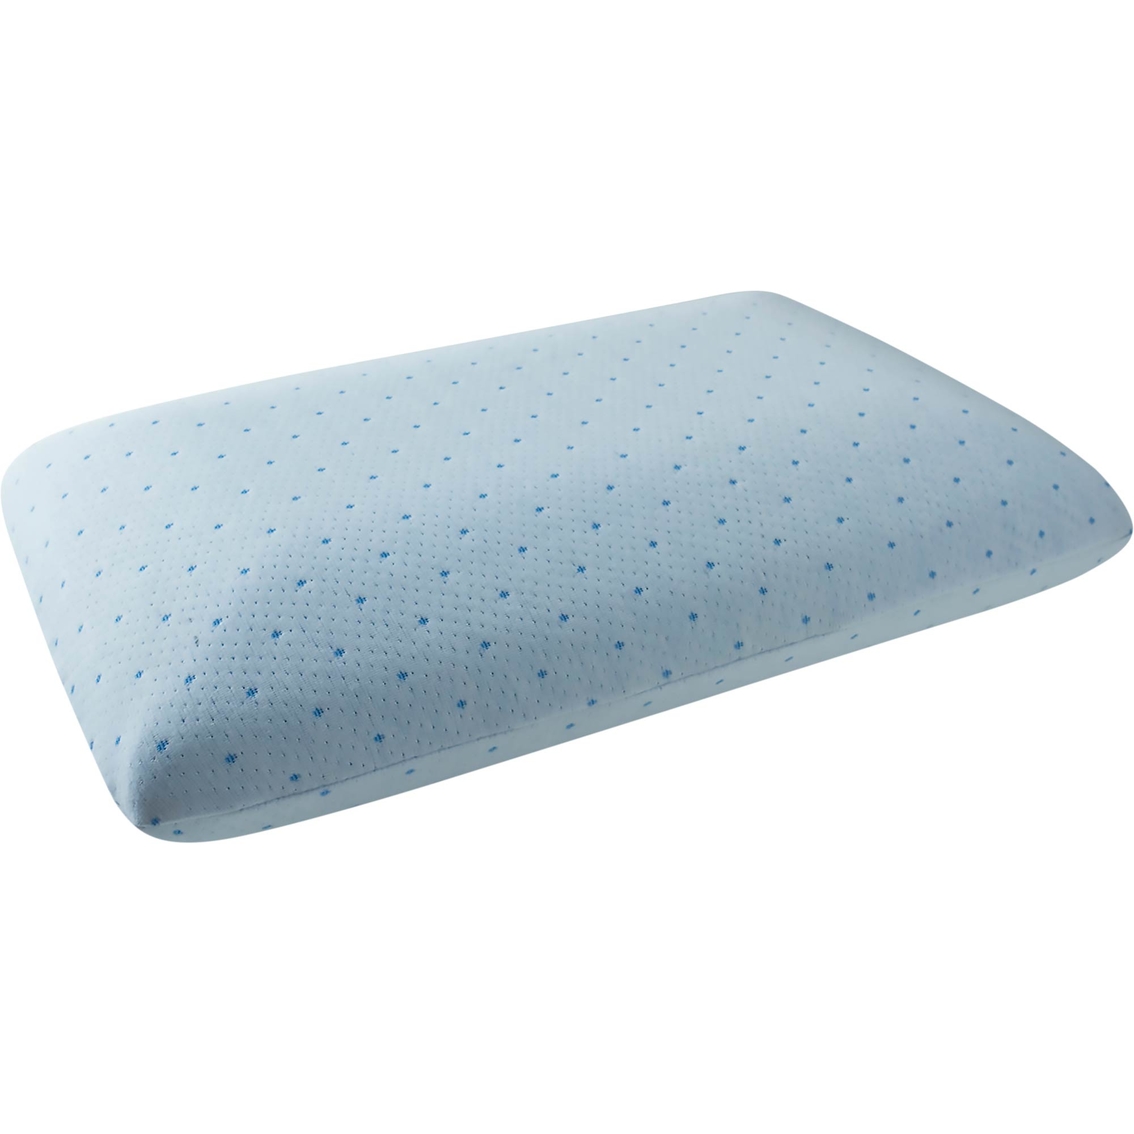 Arctic Sleep by Pure Rest Cool Blue Memory Foam Conventional Pillow - Image 3 of 5